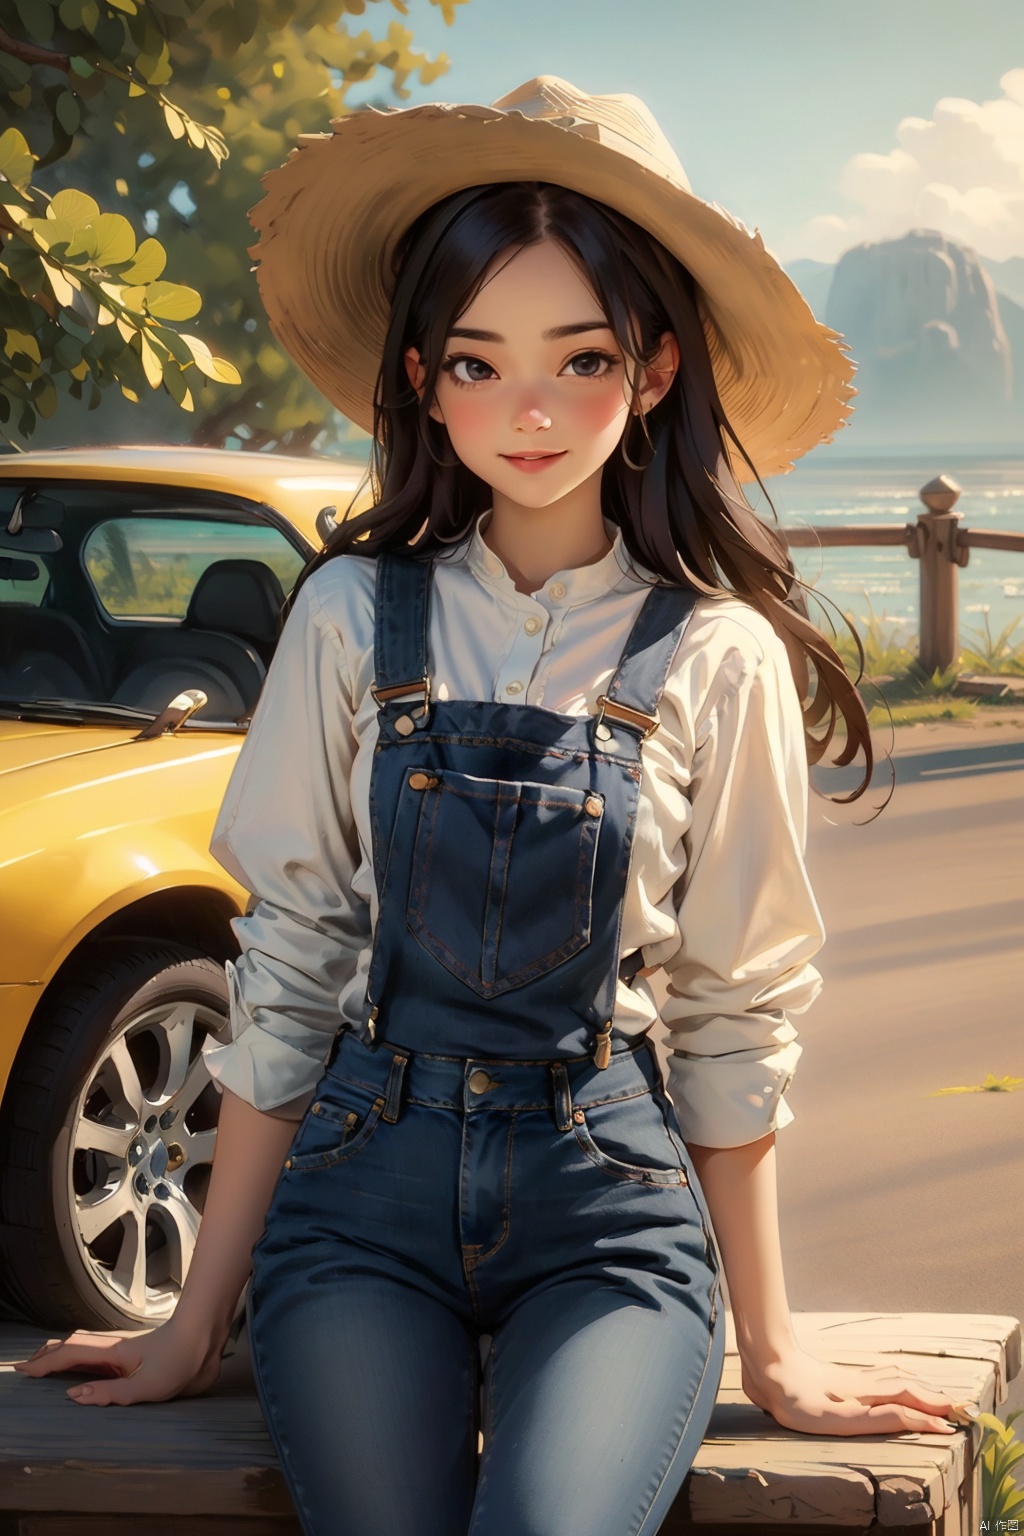 masterpiece, best quality, 8K,illustration, colorful, The rich visuals depict the joy of outdoor travel. car  Vacation girl, a girl wearing black suspenders and jeans, This is a very thin girl, not very plump, black hair and black eyes, Sitting on the ground with your back against a yellow car. Wearing a cowboy hat on the head , best qualityhighly detailed, realistic rendering, Cute Smiling Girl。This painting captures the essence of innocence, beauty, and joy, making it a beautiful and captivating artwork, Fully express the joy of the character's vacatin, The girl should be thinner, Girls' clothes should not be too revealing , Hair fluttering in the wind